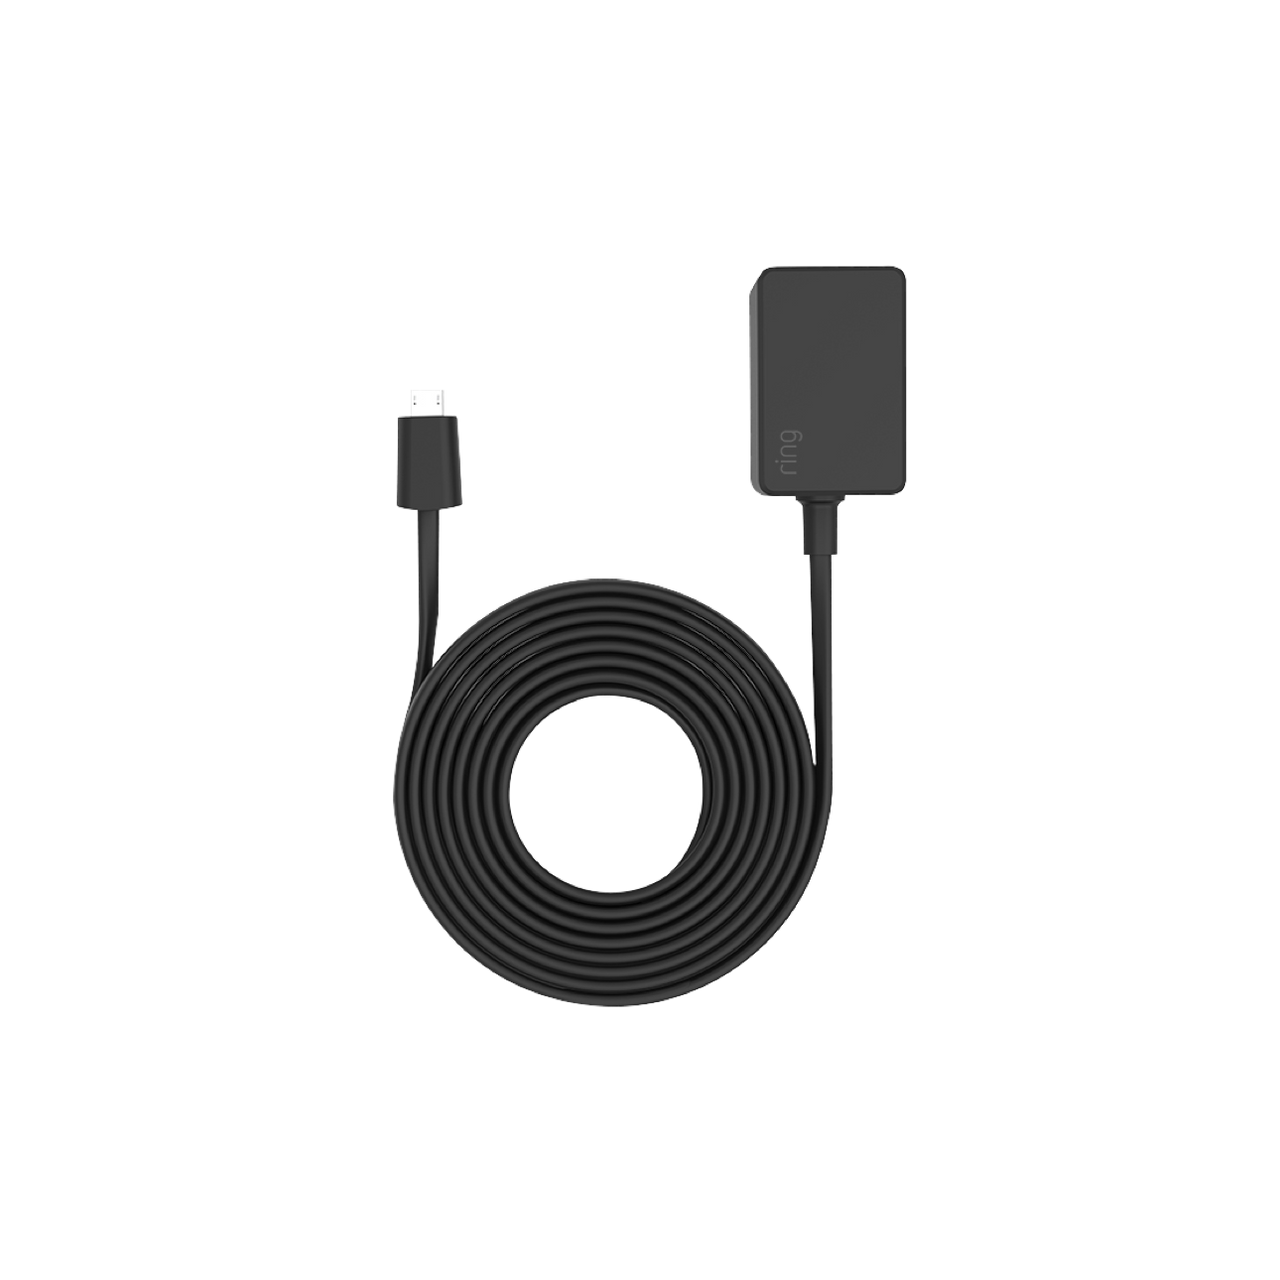 products/IDC_3M_Cable_Black_1290x1290_c4a77530-66dd-4bef-9bb4-0f02778dca61.png